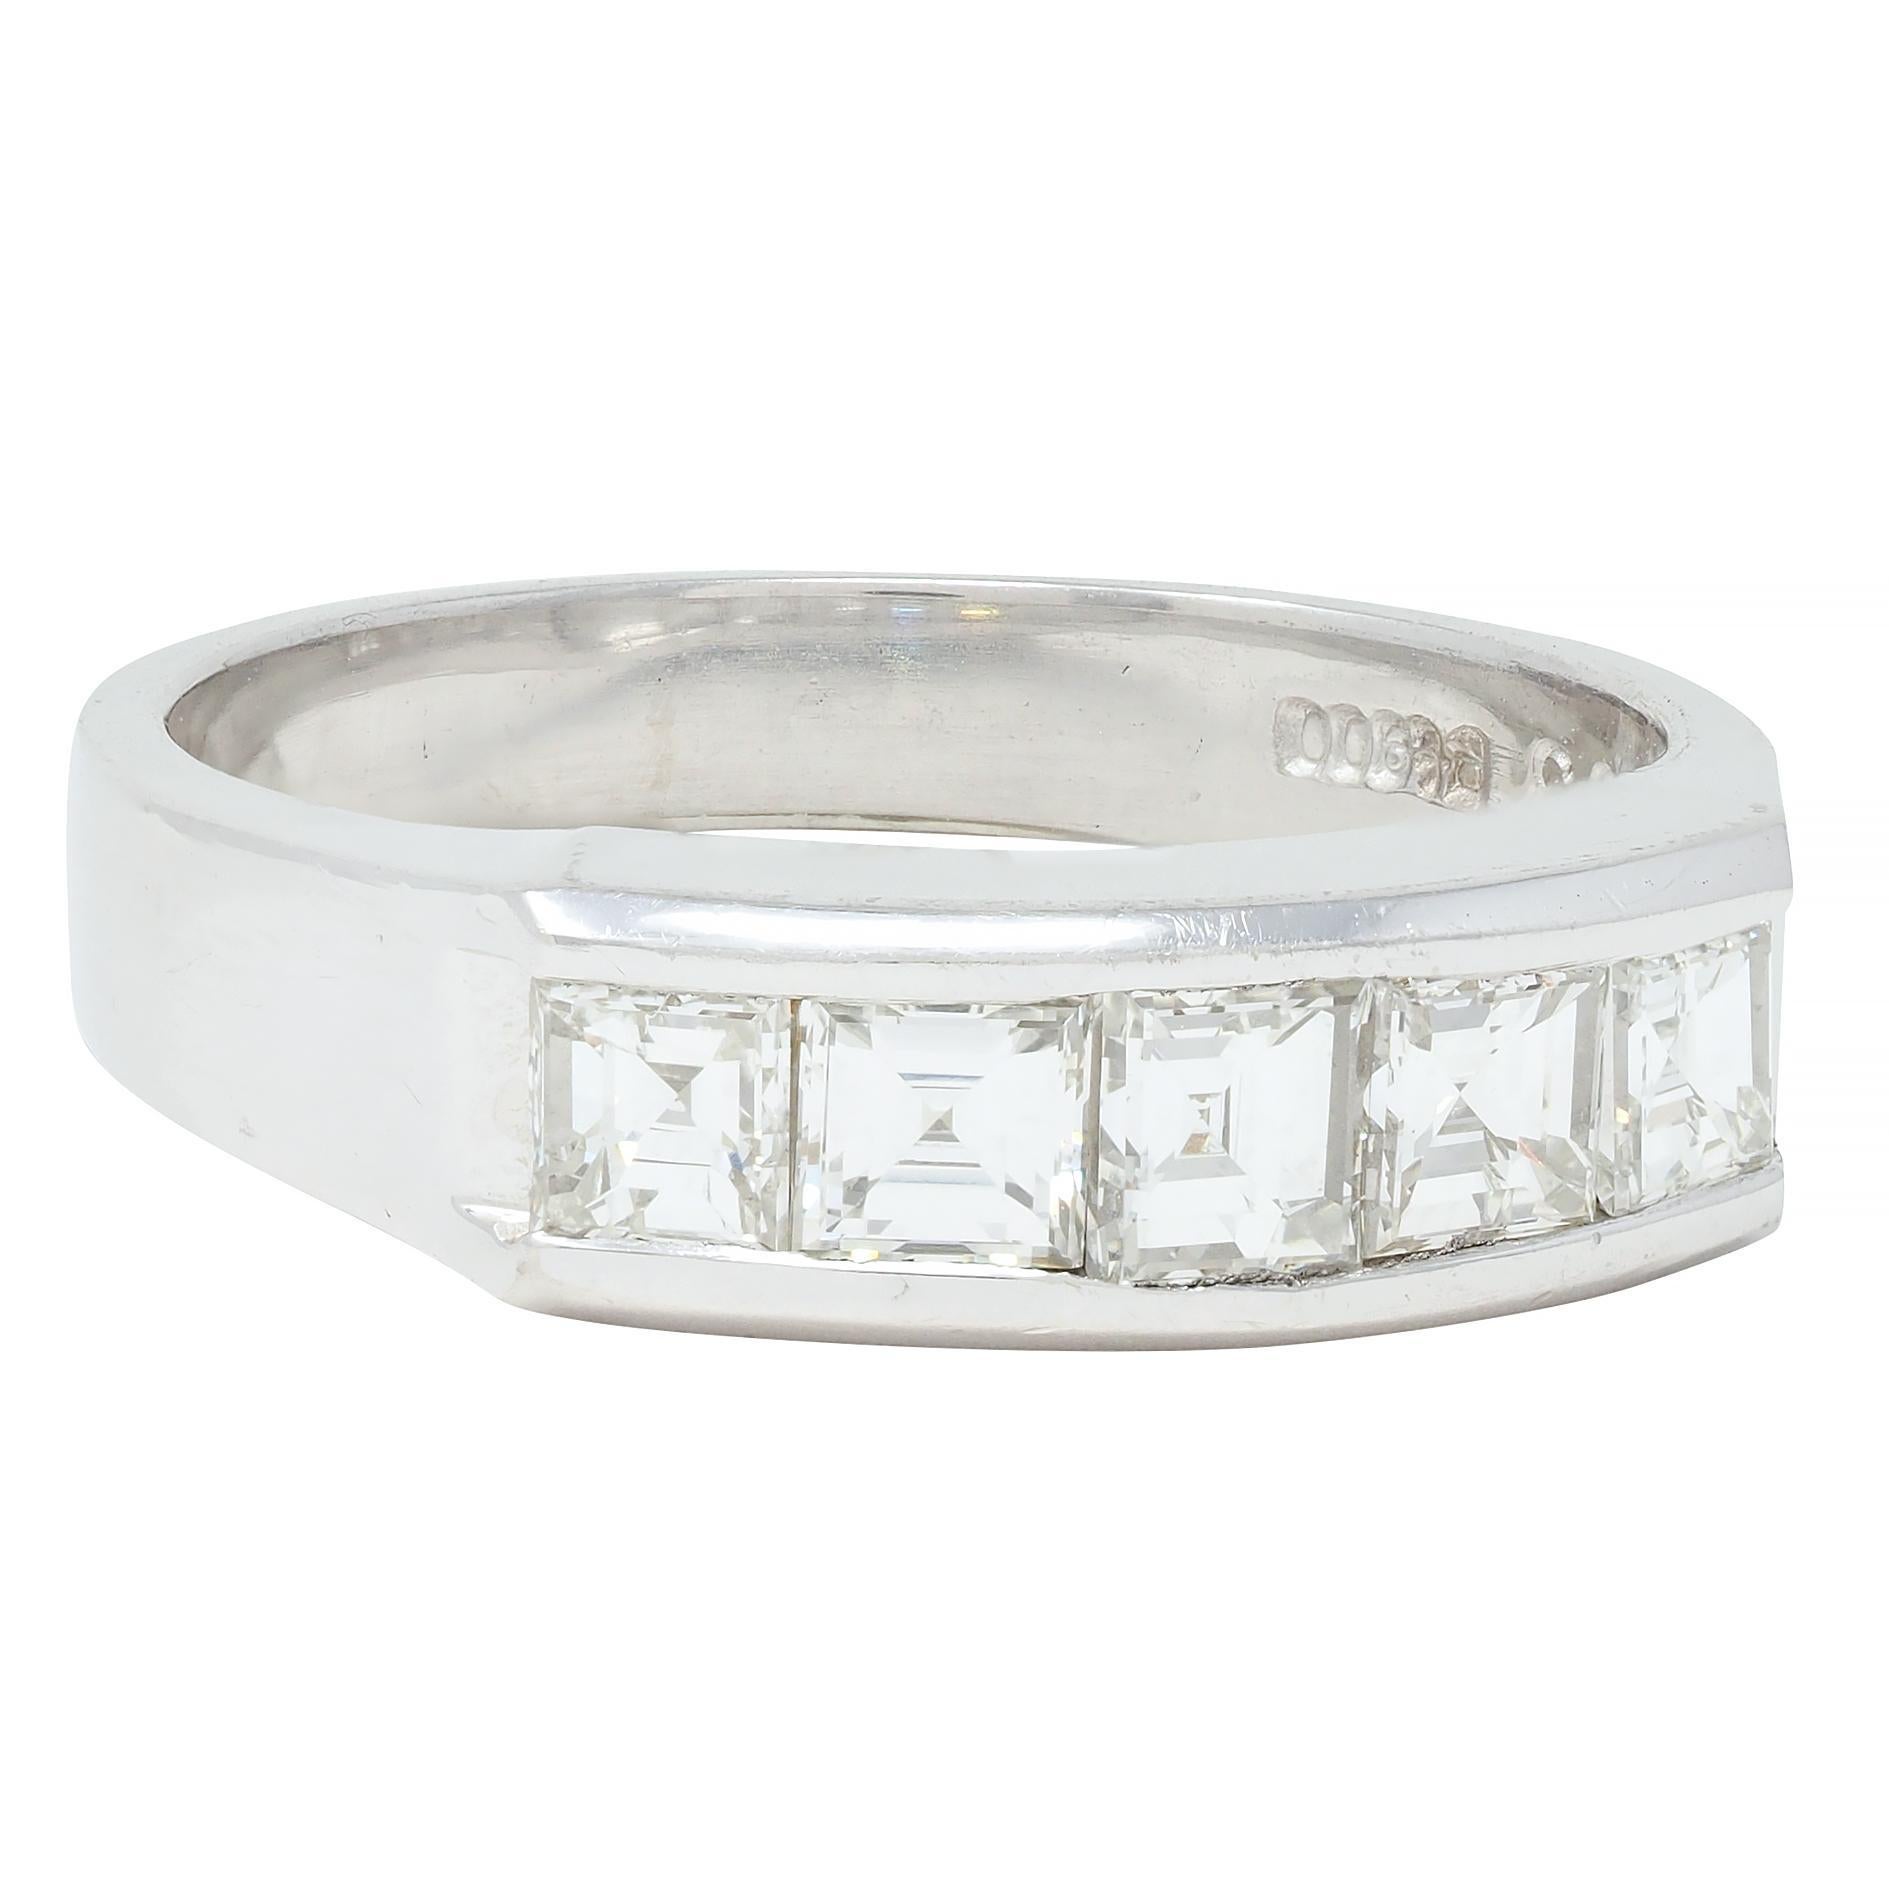 Featuring five square step-cut diamonds channel set to front
Weighing 1.03 carats total - H/J color with VS2 clarity
Completed by high polish finish
Inscribed with carat weights
Stamped for platinum
Circa: 2000s 
Ring size: 6 1/2 and sizable